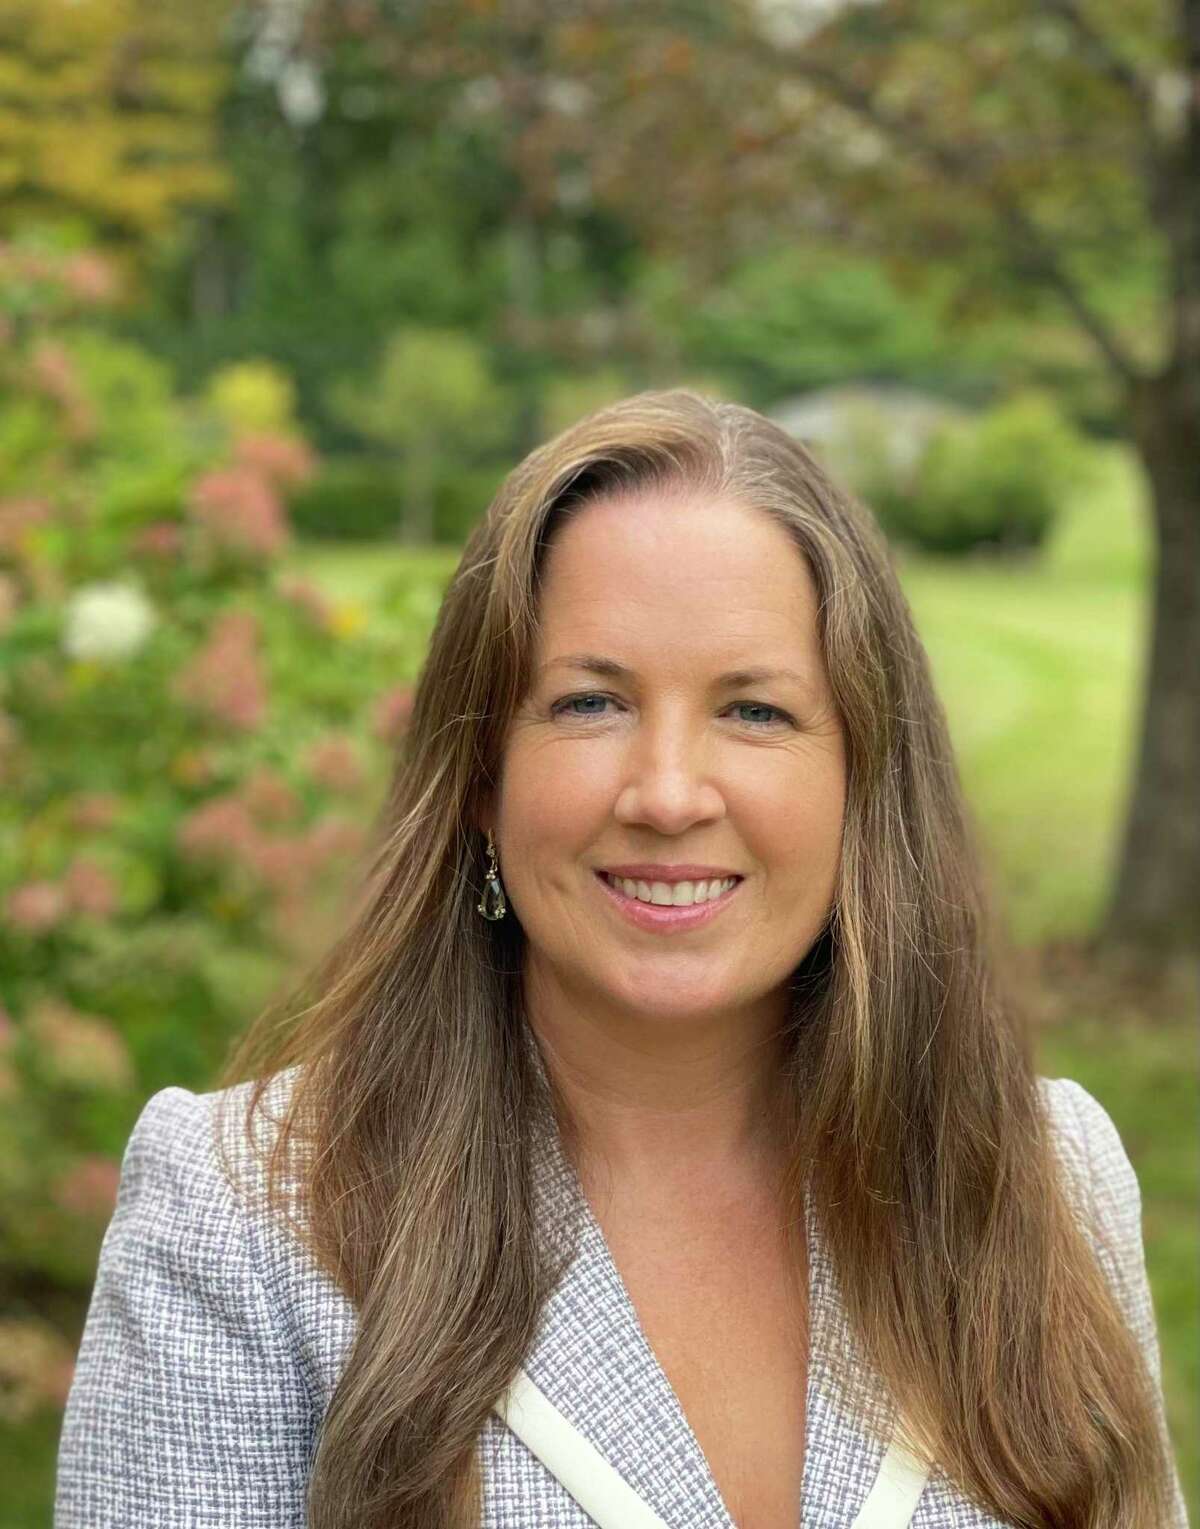 Kara Philbin, a Greenwich parent with four children in the district, has filed with the state to be a write-in candidate with an independent campaign for the Greenwich Board of Education.